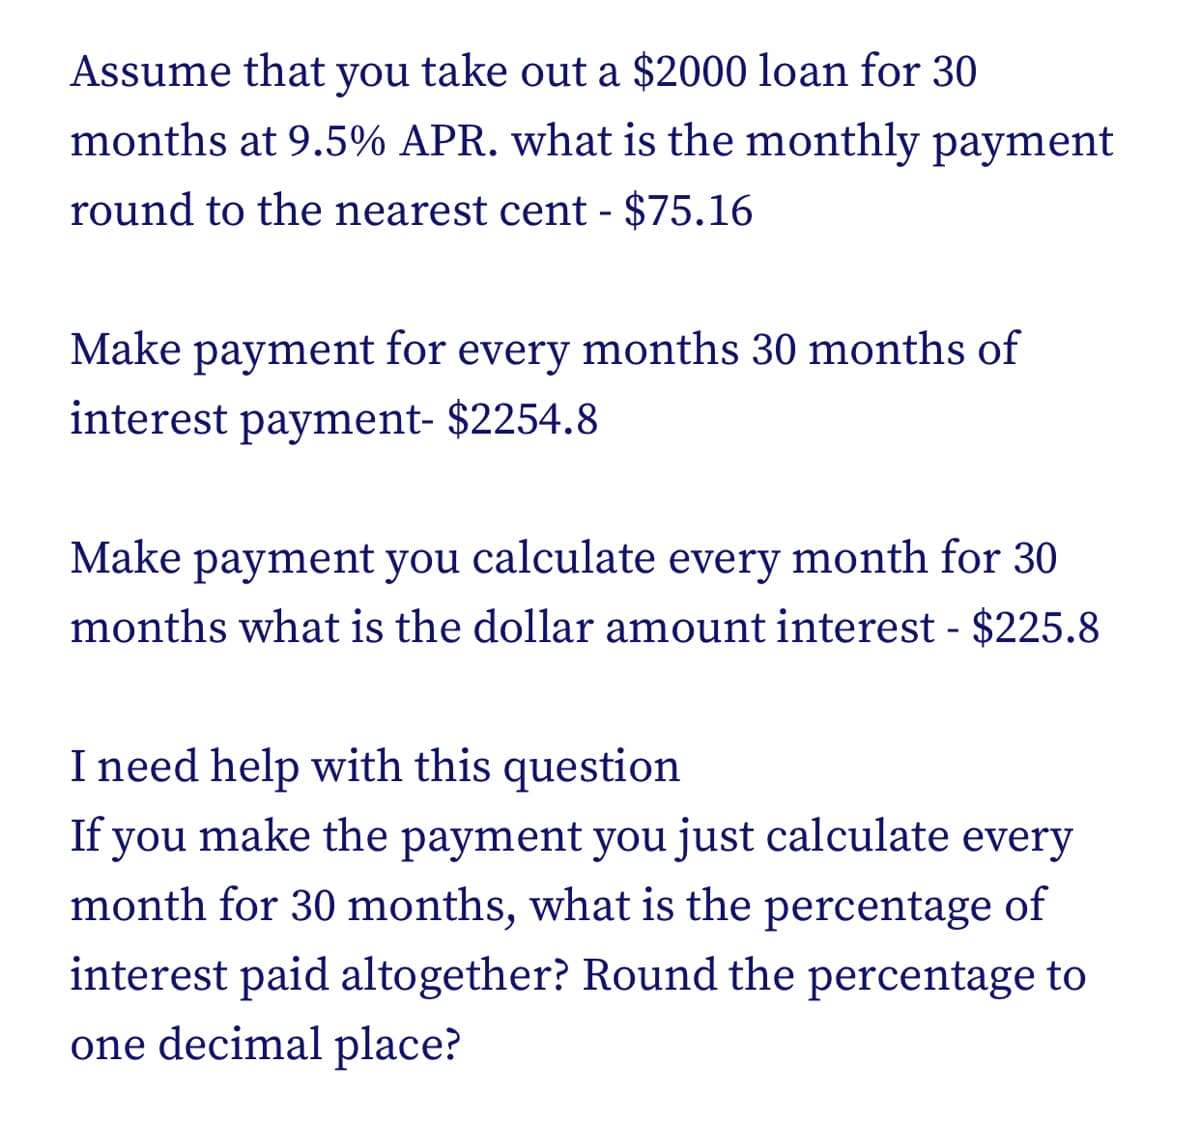 Assume that you take out a $2000 loan for 30
months at 9.5% APR. what is the monthly payment
round to the nearest cent - $75.16
Make payment for every months 30 months of
interest payment- $2254.8
Make payment you calculate every month for 30
months what is the dollar amount interest - $225.8
I need help with this question
If you make the payment you just calculate every
month for 30 months, what is the percentage of
interest paid altogether? Round the percentage to
one decimal place?
